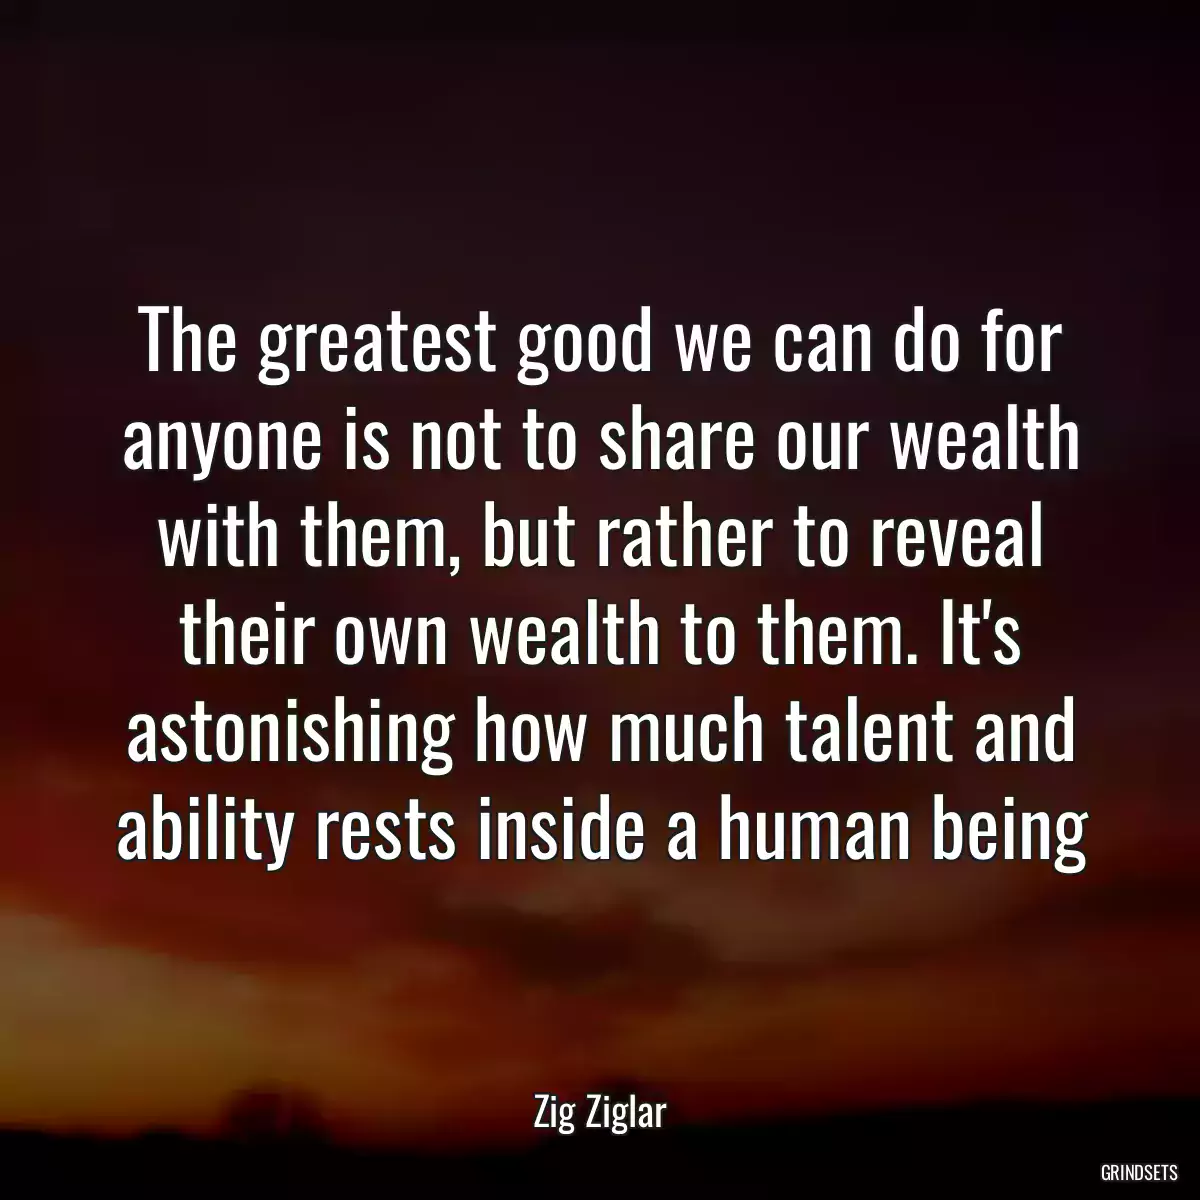 The greatest good we can do for anyone is not to share our wealth with them, but rather to reveal their own wealth to them. It\'s astonishing how much talent and ability rests inside a human being